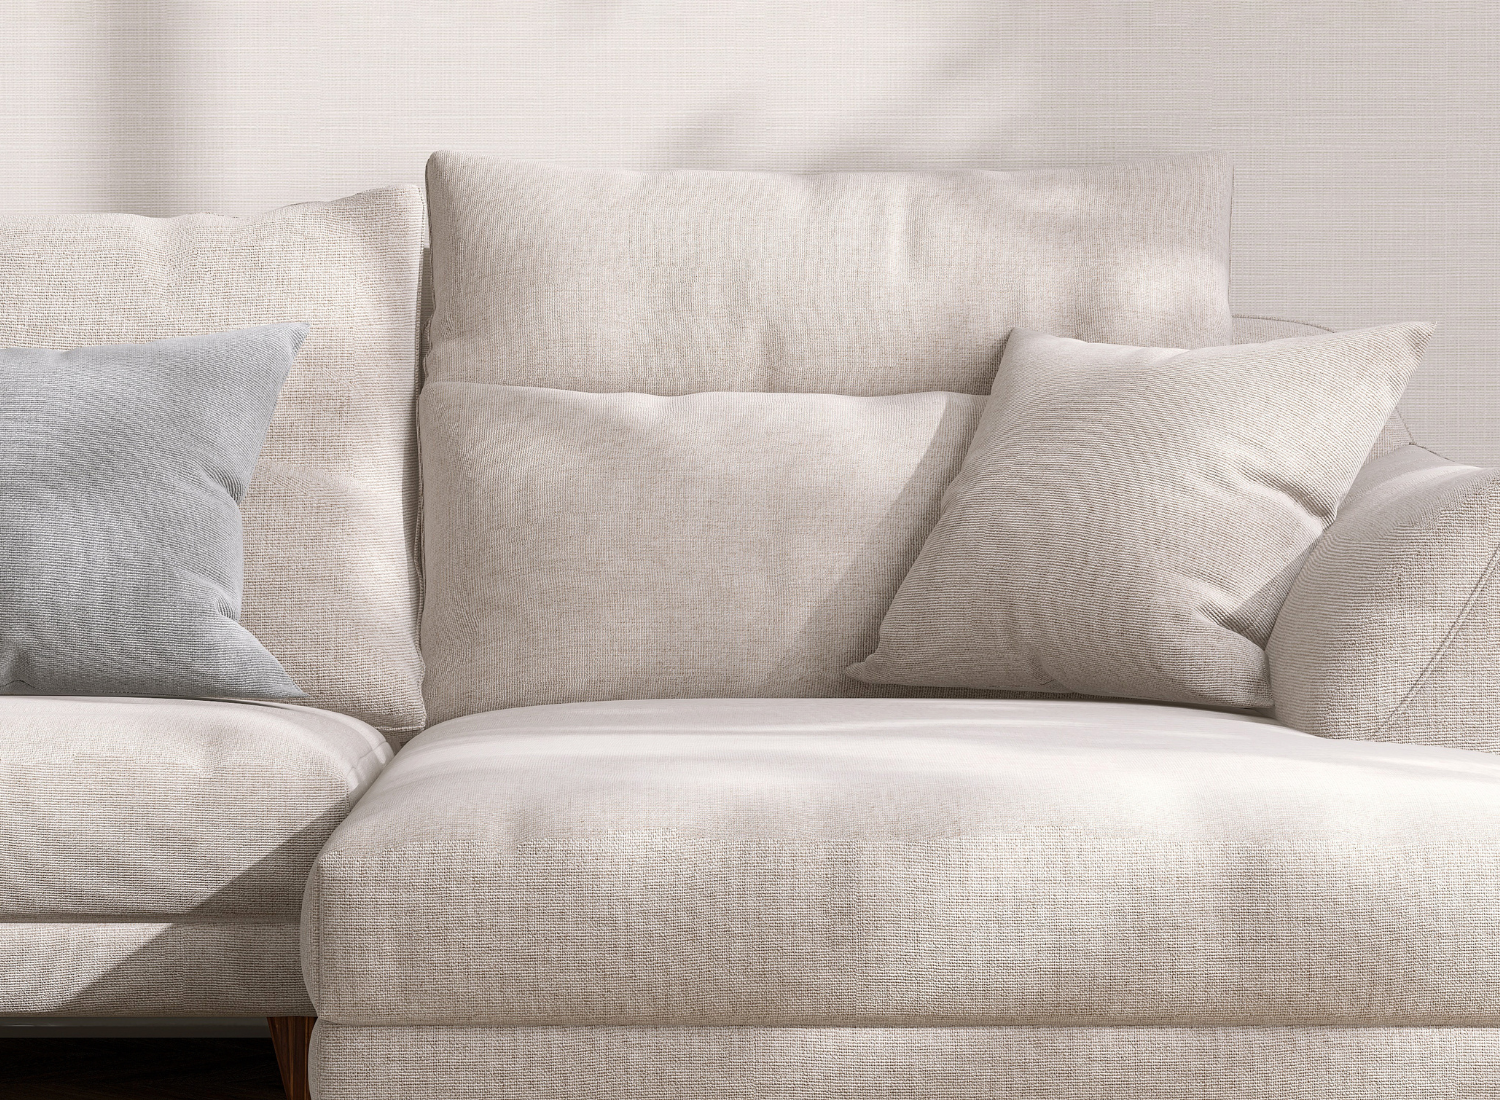 How Upholstering Can Be as Easy as Only Replacing Foam